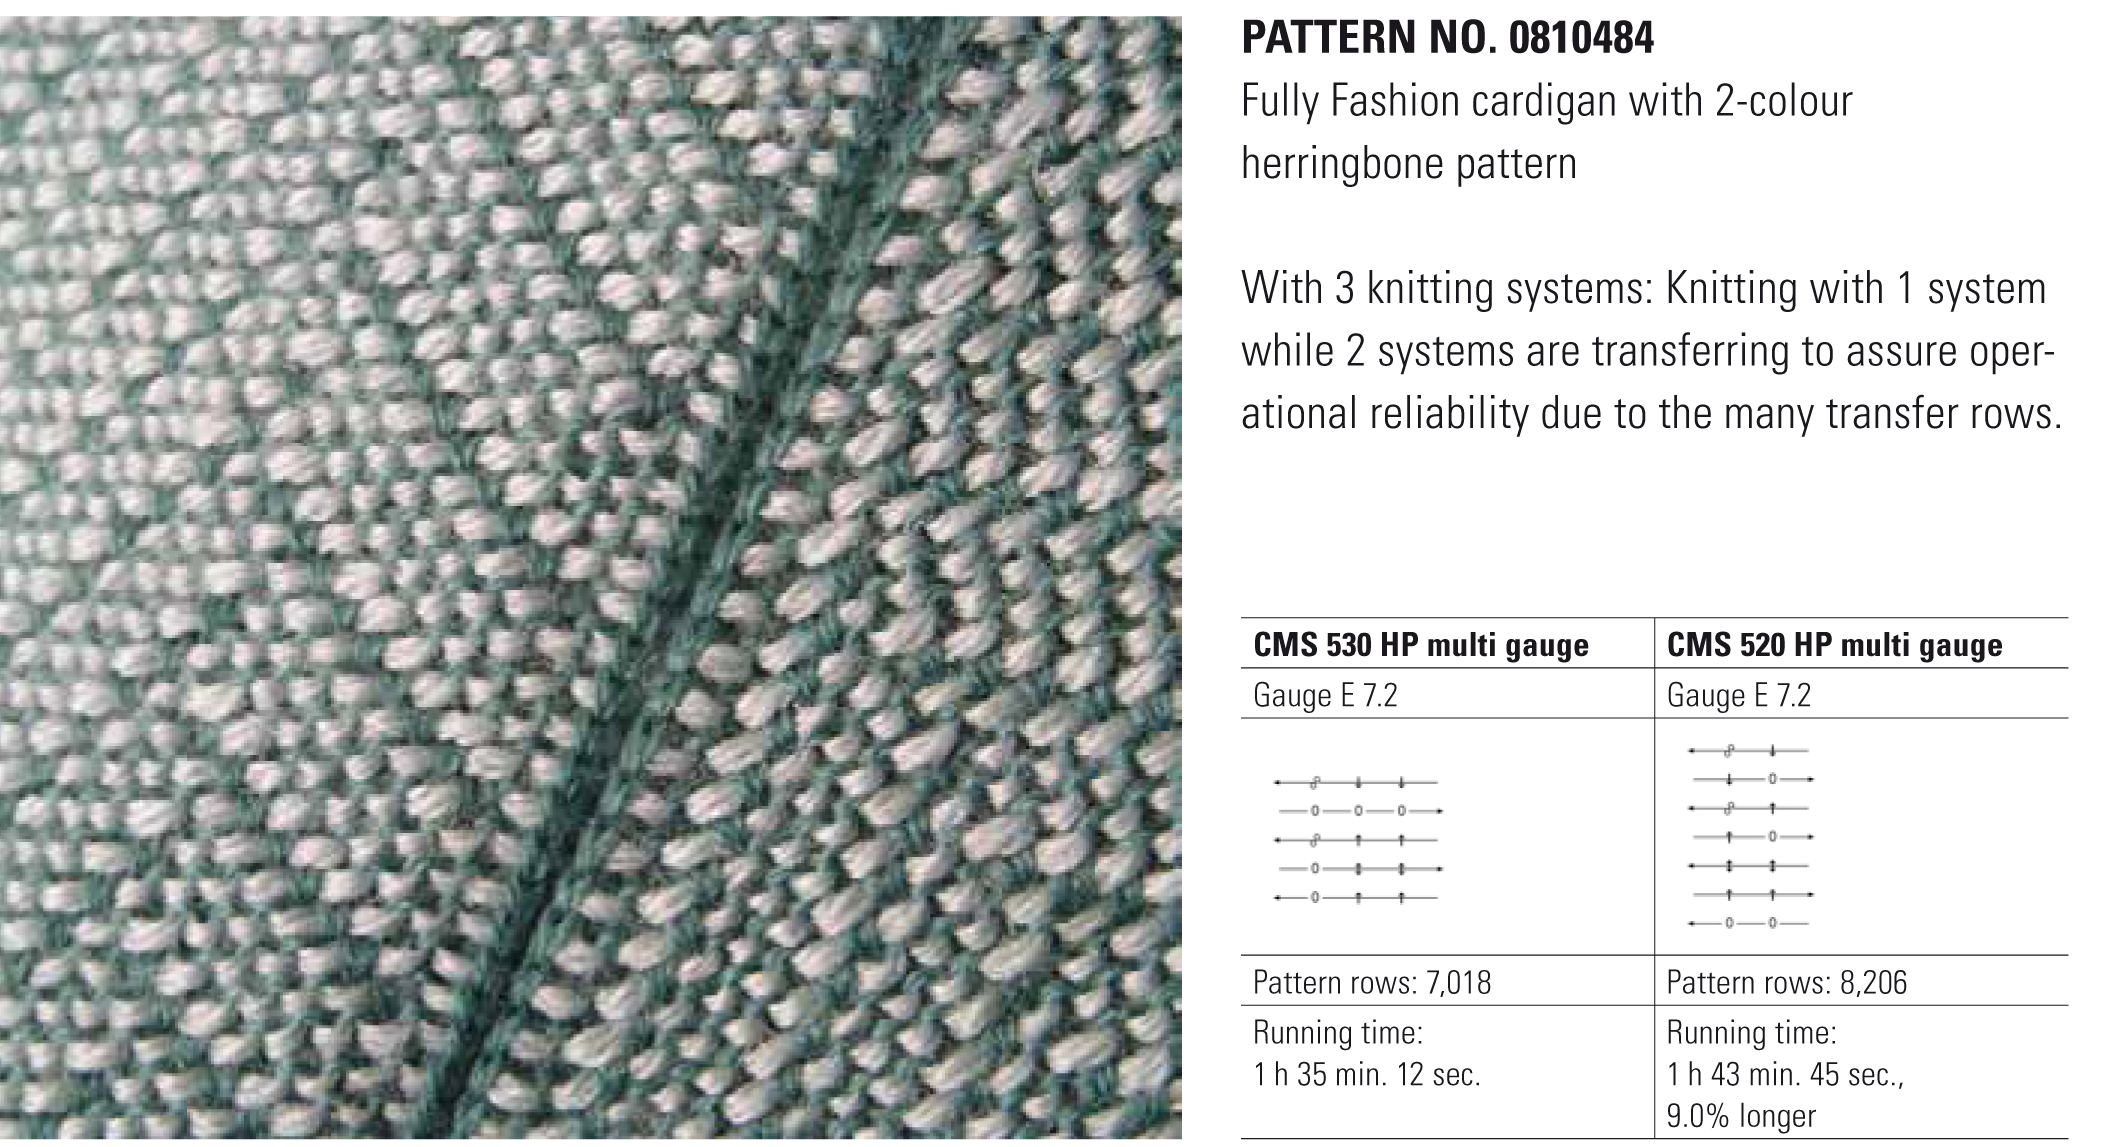 Knitting times comparison